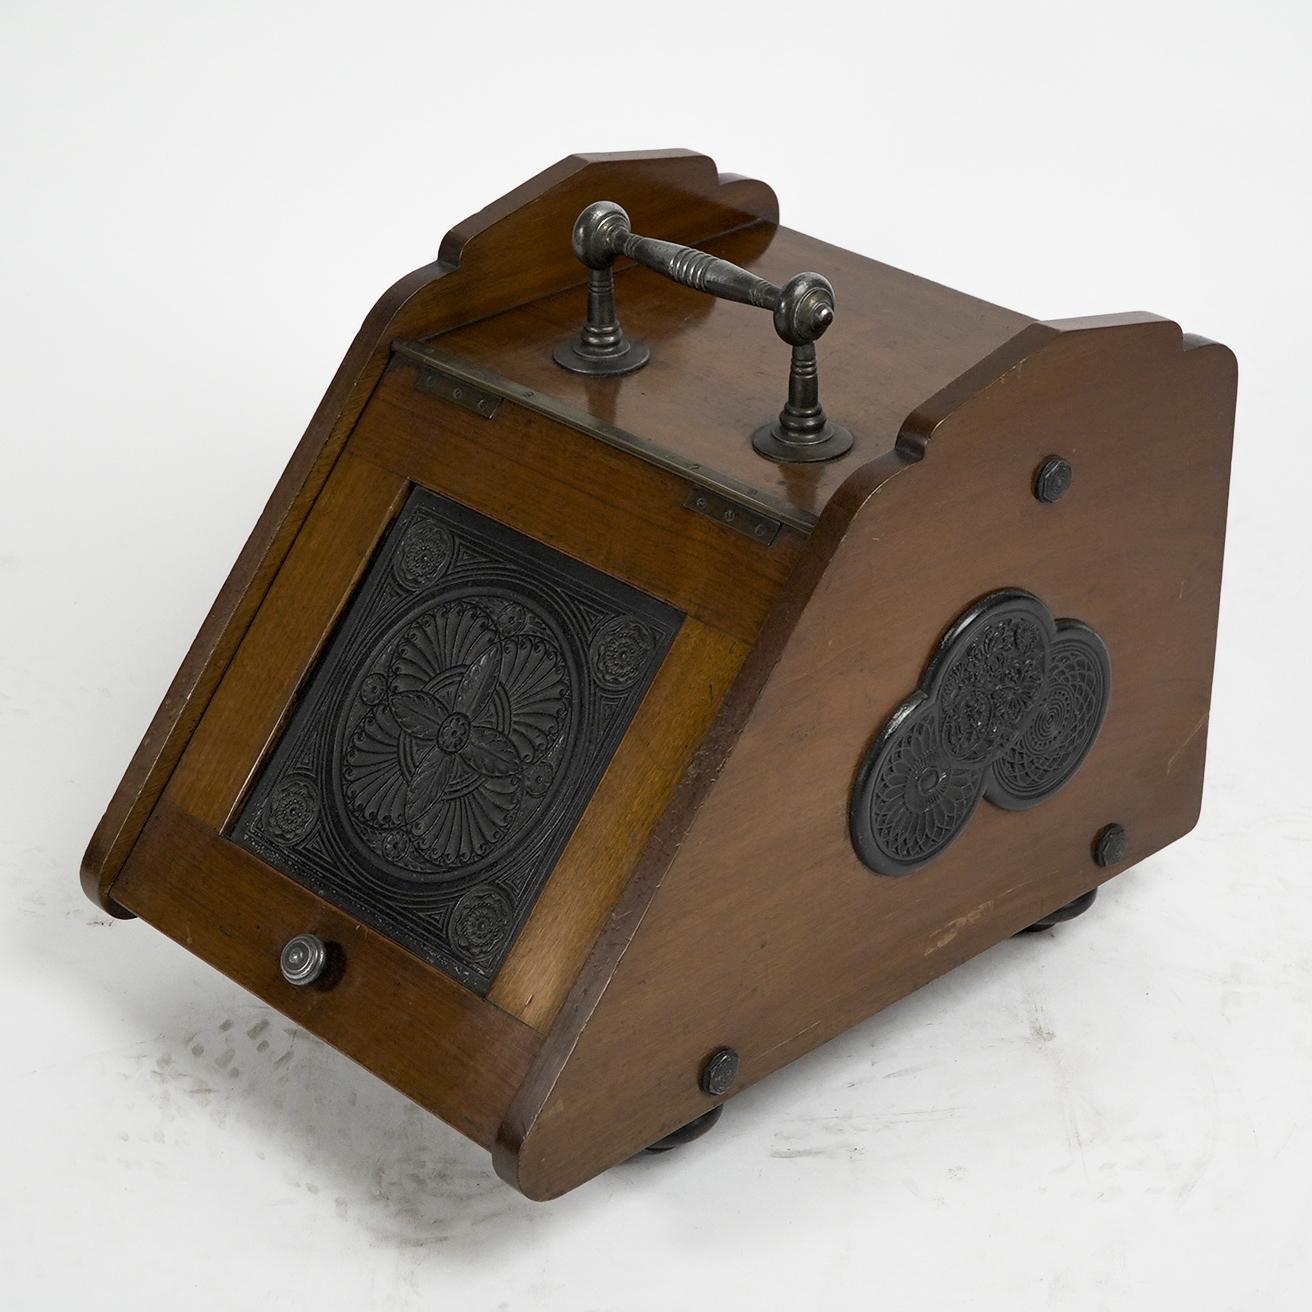 Thomas Jeckyll for Barnard Bishop and Barnard. A rare Aesthetic Anglo-Japanese Walnut coal box with Japanese style circular devises to the front lift up flap, and treble linked circular devises to each side are identical to the circular devices